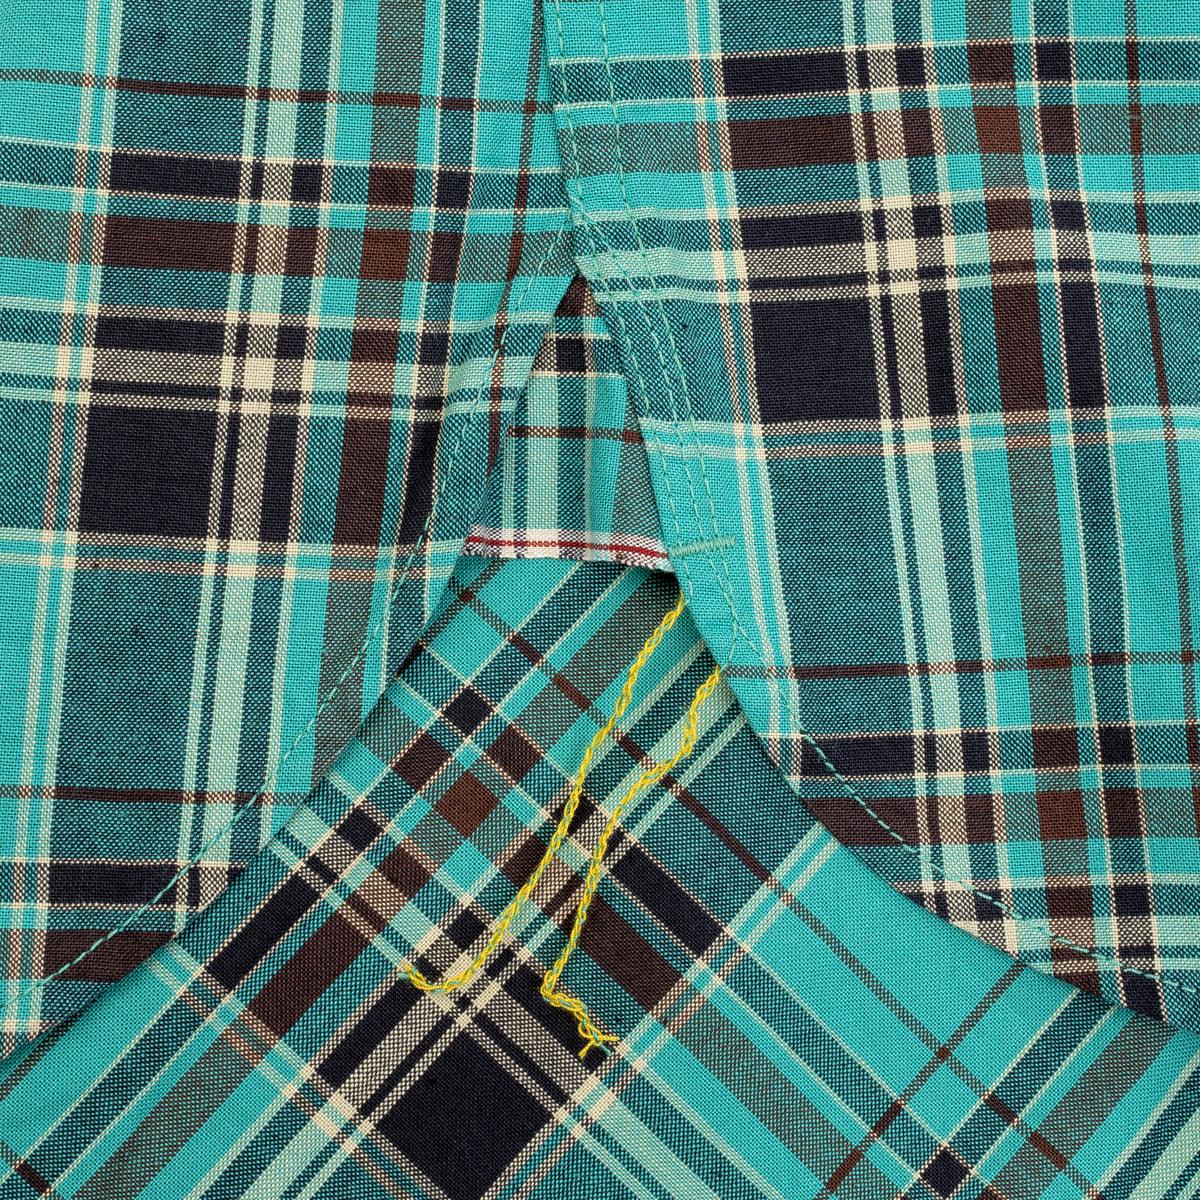 Image showing the IHSH-356-GRN - 5oz Selvedge Madras Check Work Shirt - Green which is a Shirts described by the following info Bargain, Released and sold on the IRON HEART GERMANY online store